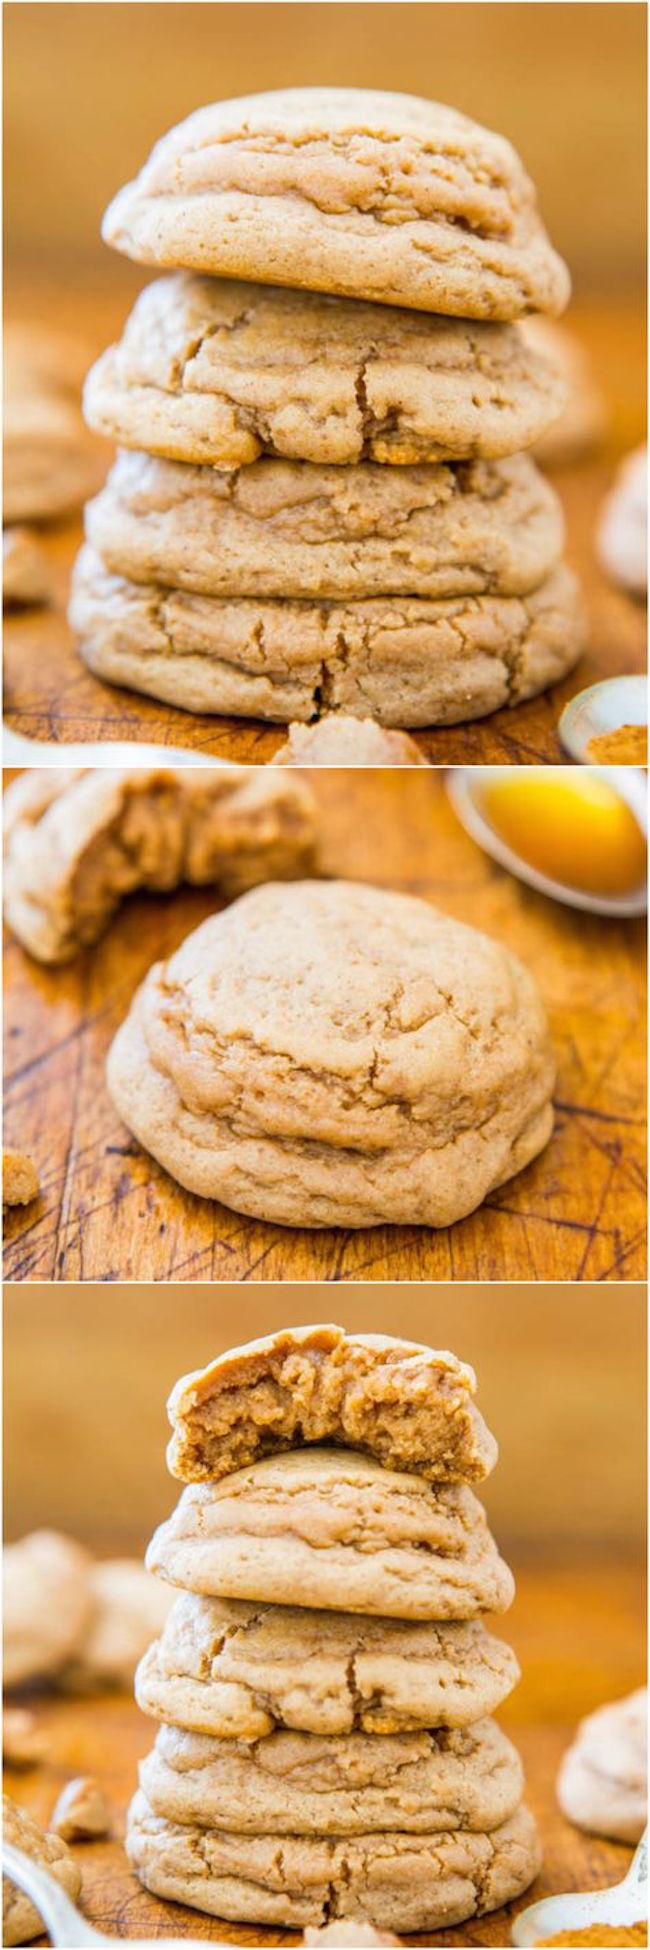 Soft and Puffy Pumpkin Spice Honey Cookies - Super soft cookies that just melt in your mouth! You're going to love these puffy cuties!!